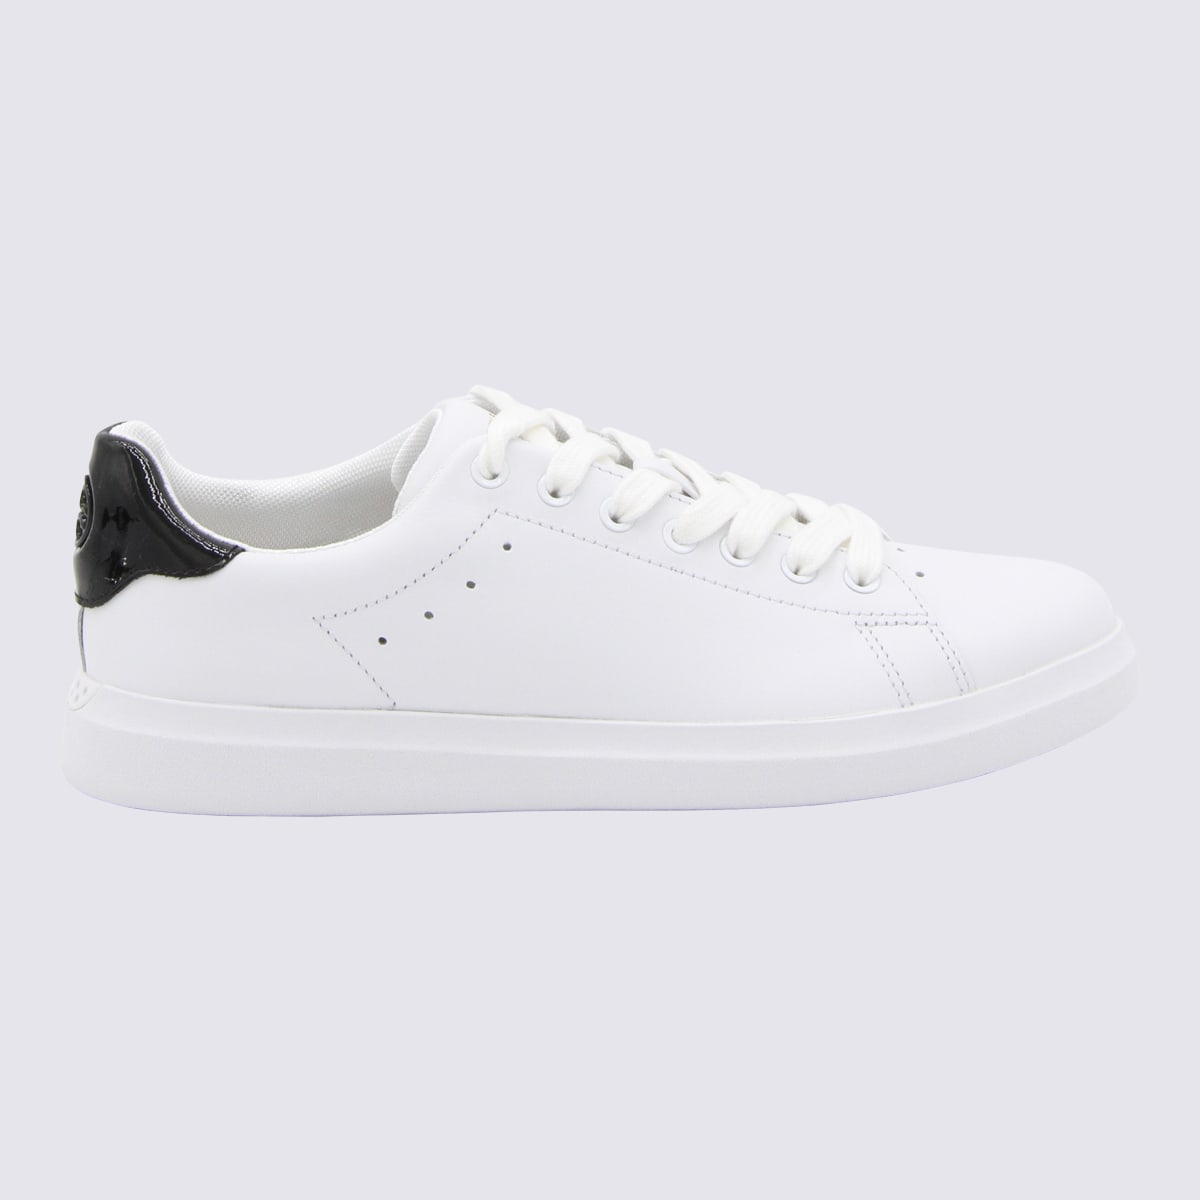 TORY BURCH WHITE AND BLACK LEATHER SNEAKERS